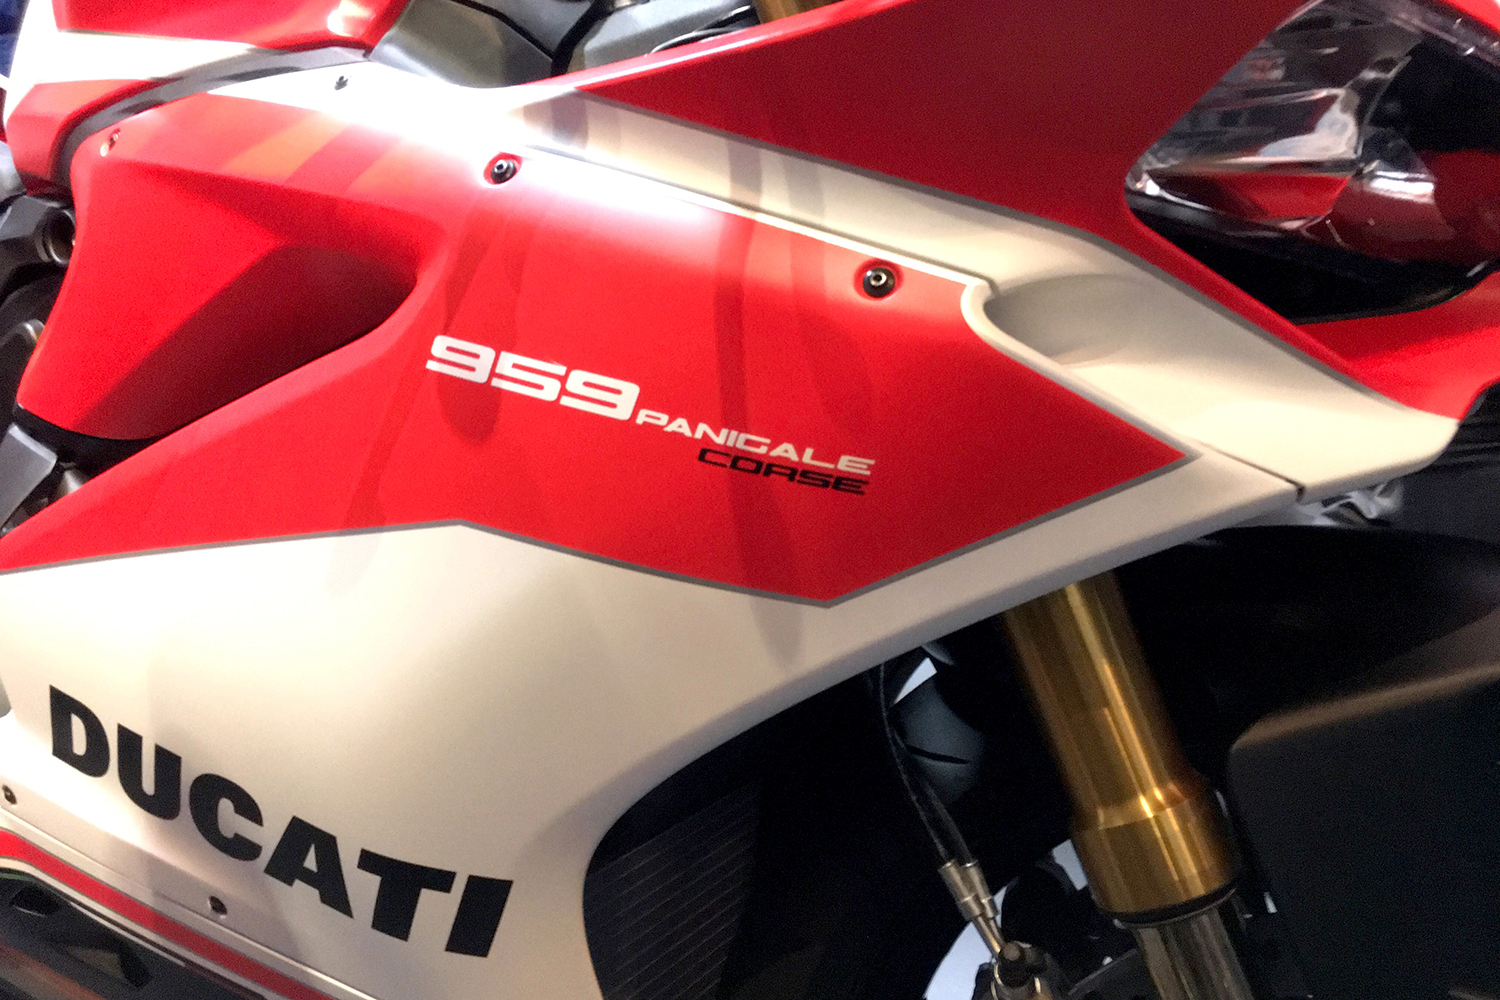 ducati 2018 motorcycle preview panigale 959 corse logos